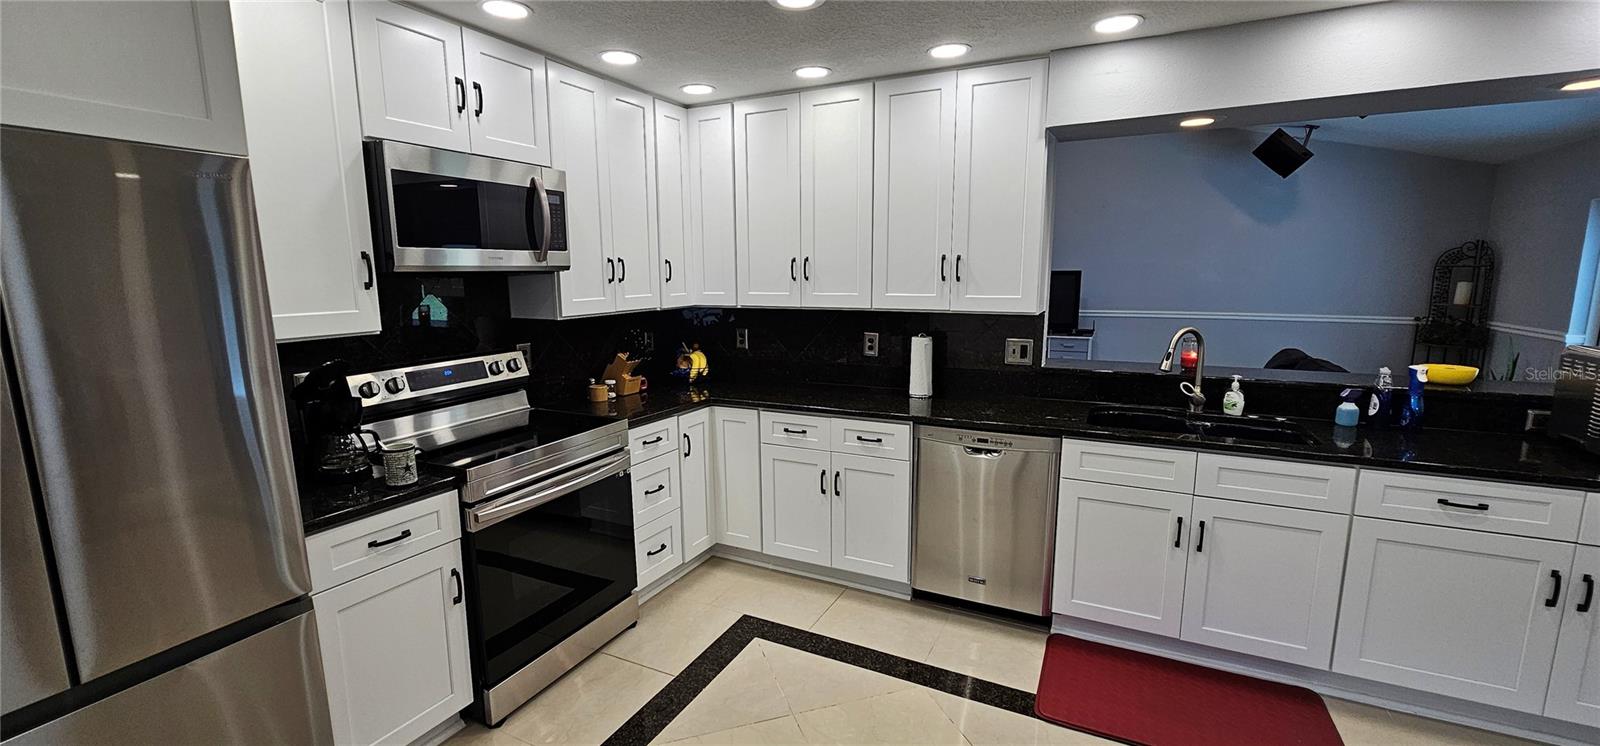 Lots of room to cook in this beautifully updated kitchen